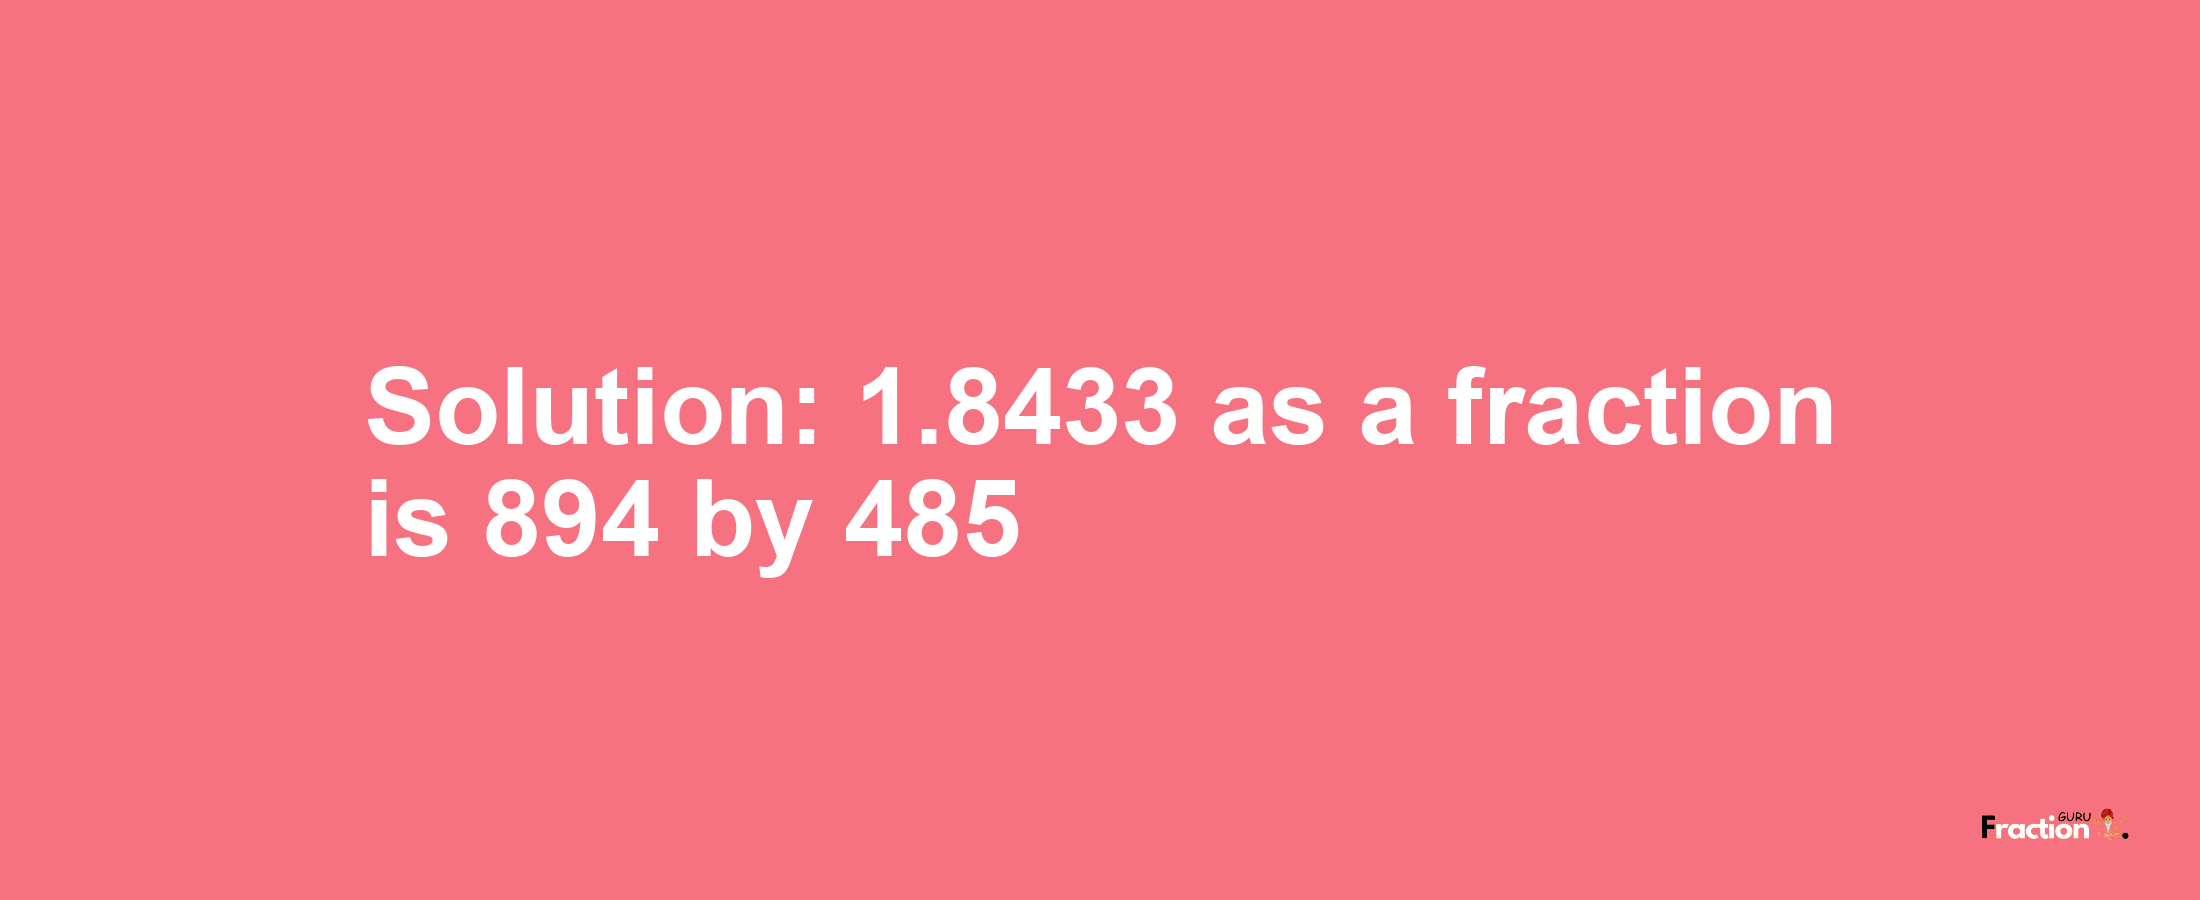 Solution:1.8433 as a fraction is 894/485